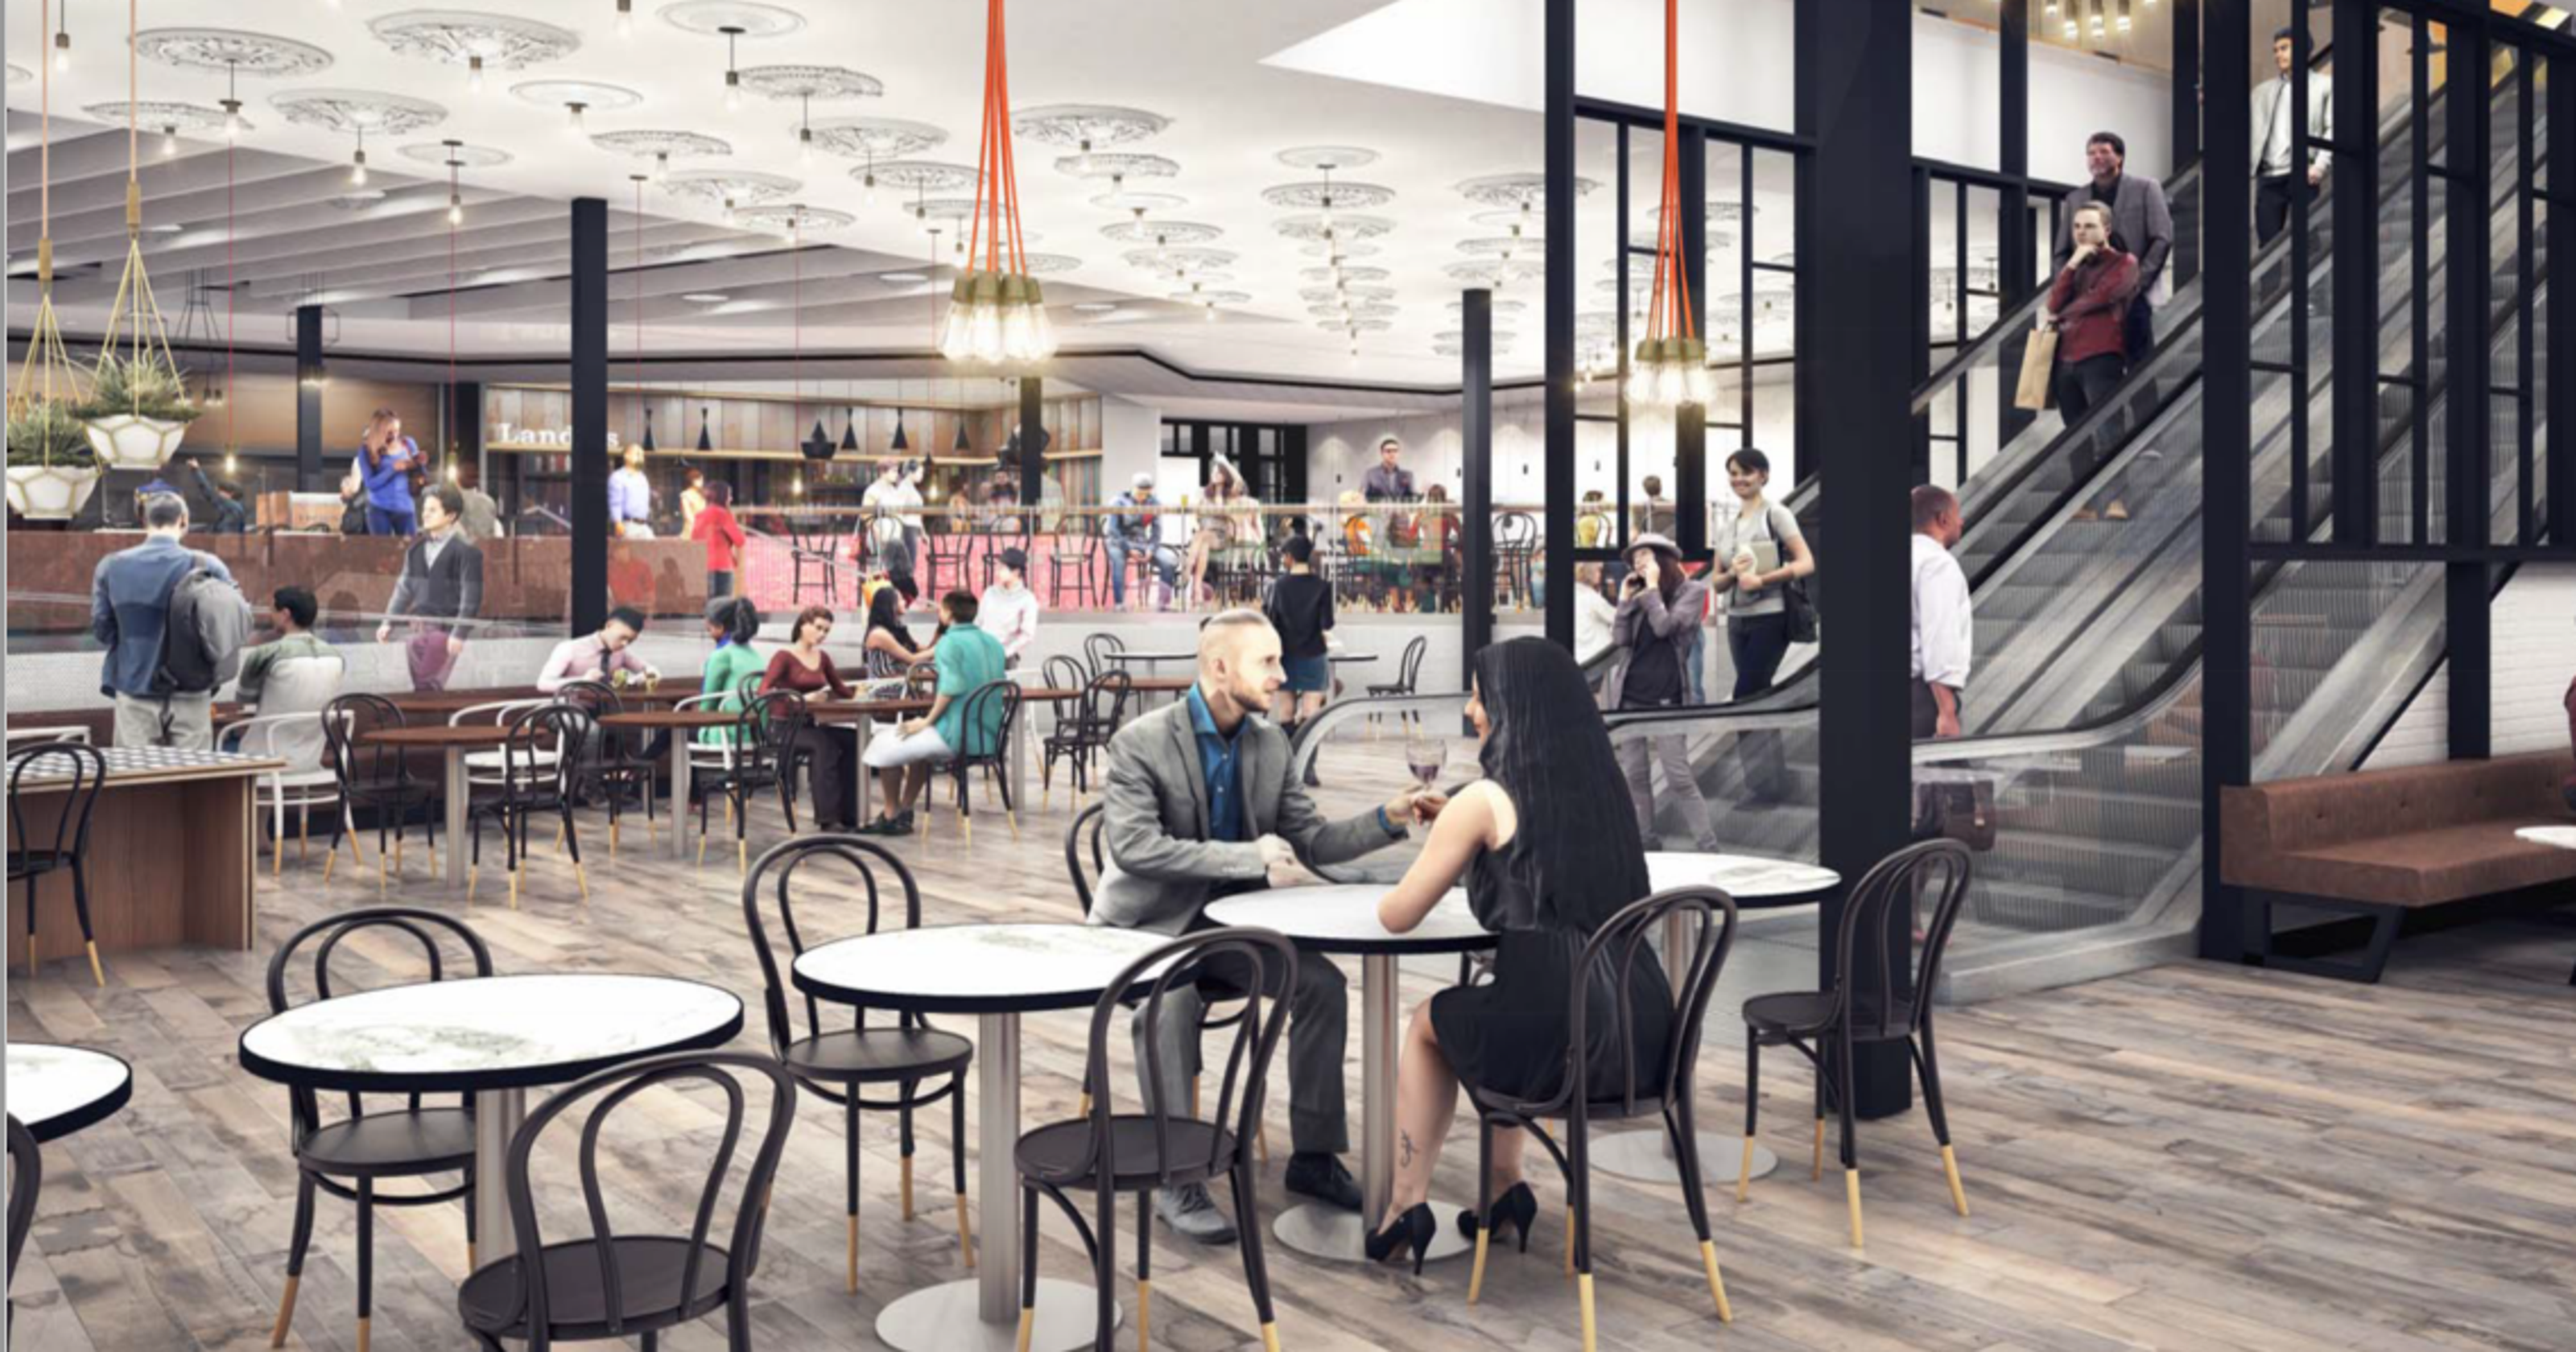 Zinburger Sues Garden State Plaza Over Mall Renovation That